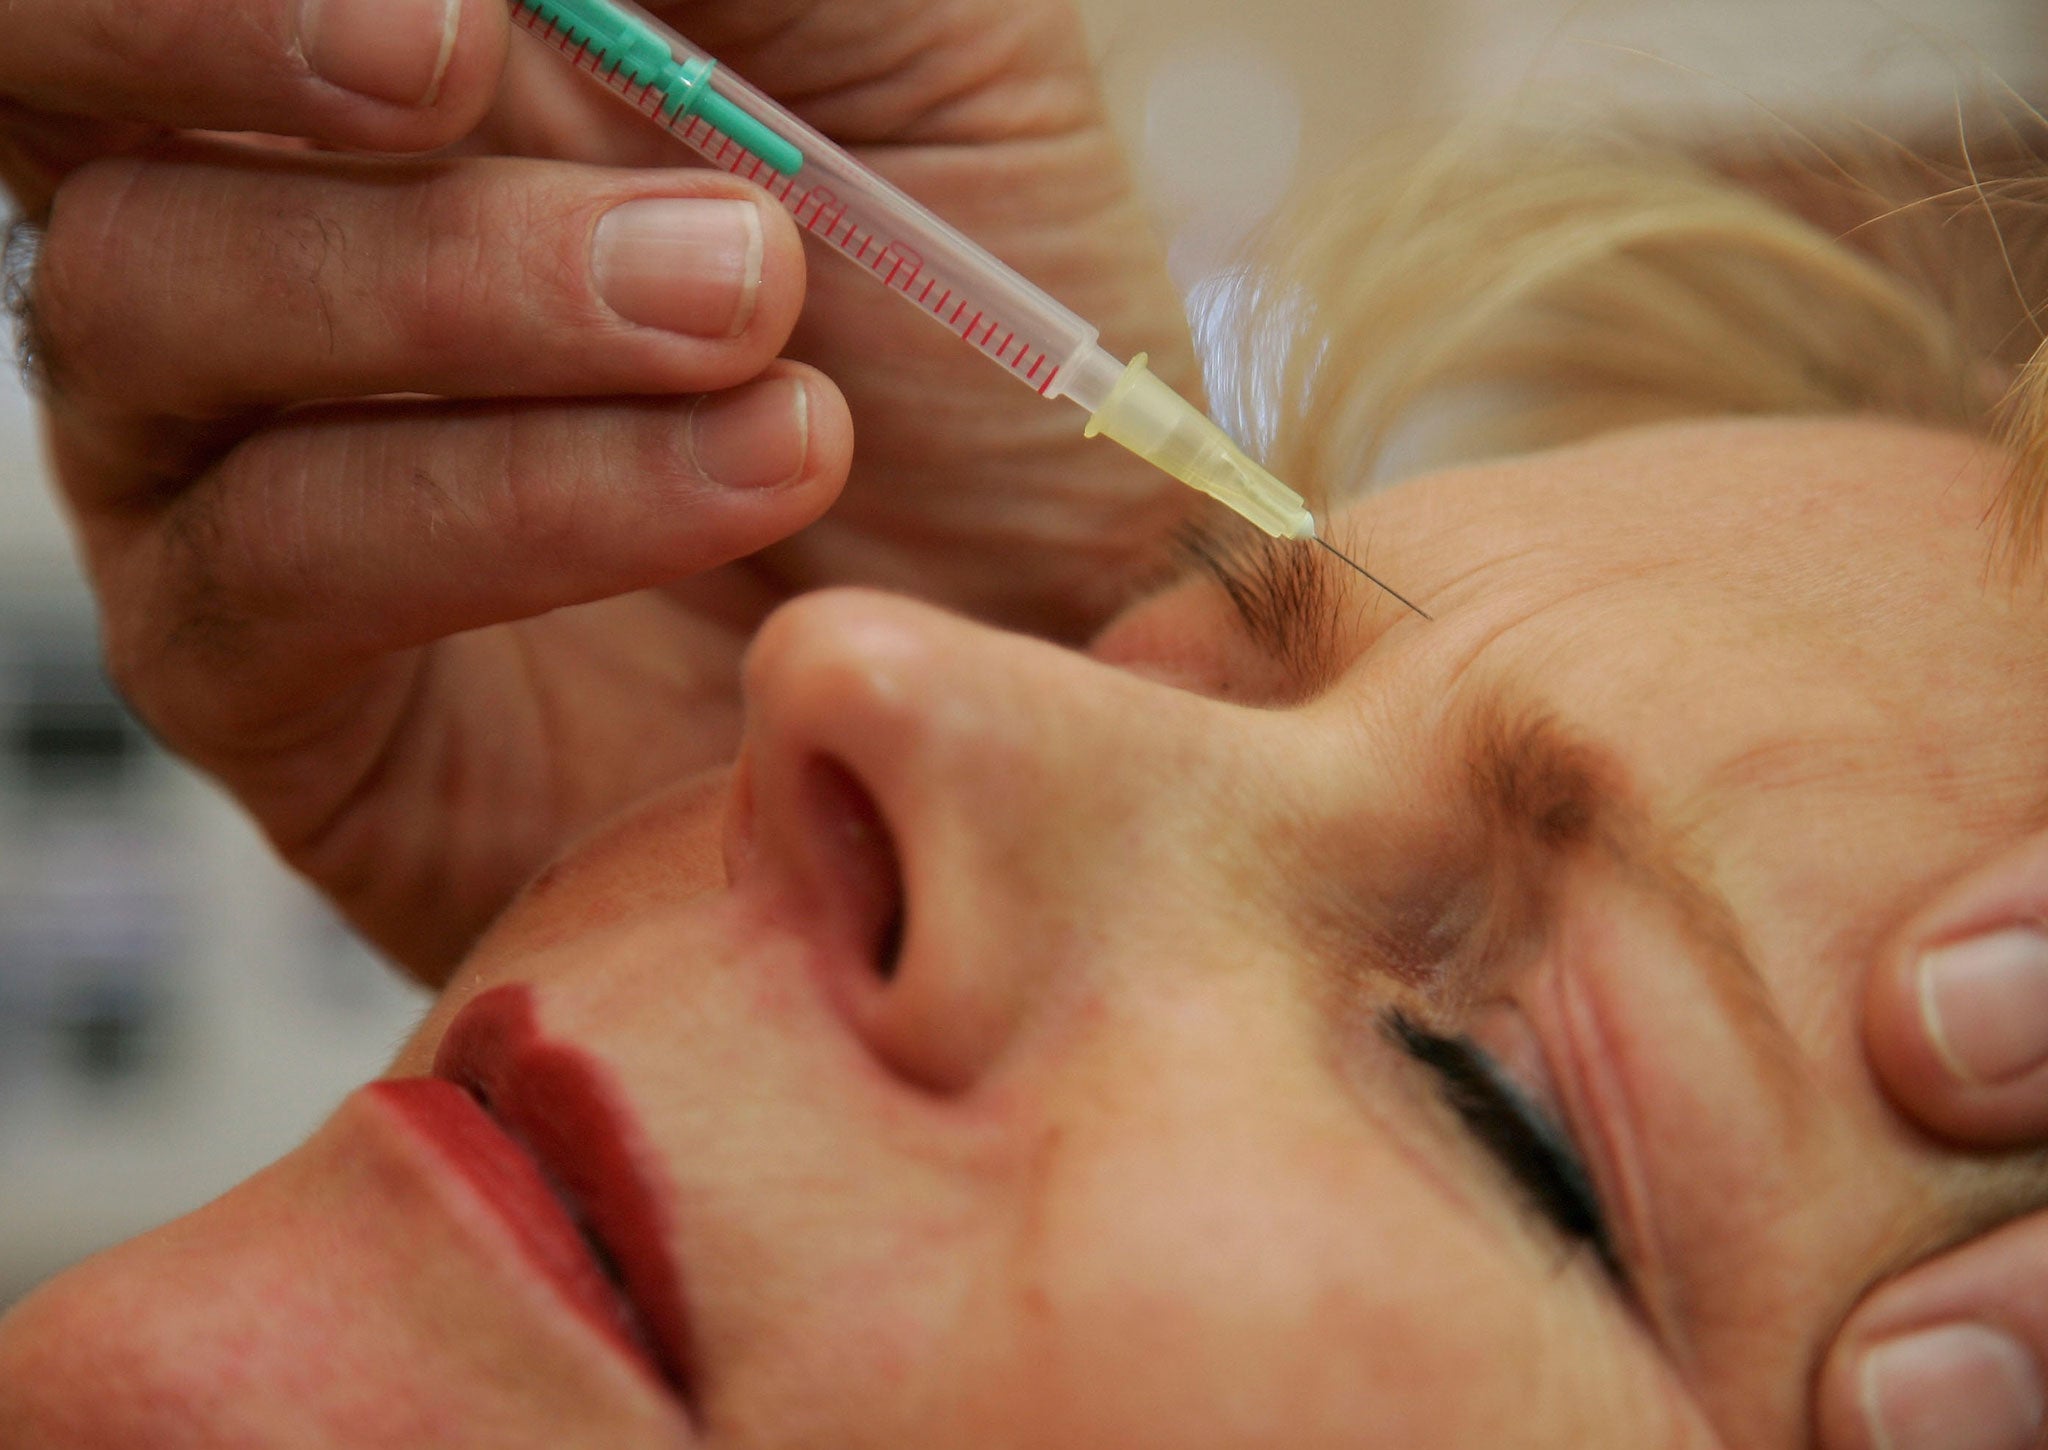 A doctor injects a patient with Botox at a cosmetic treatment center